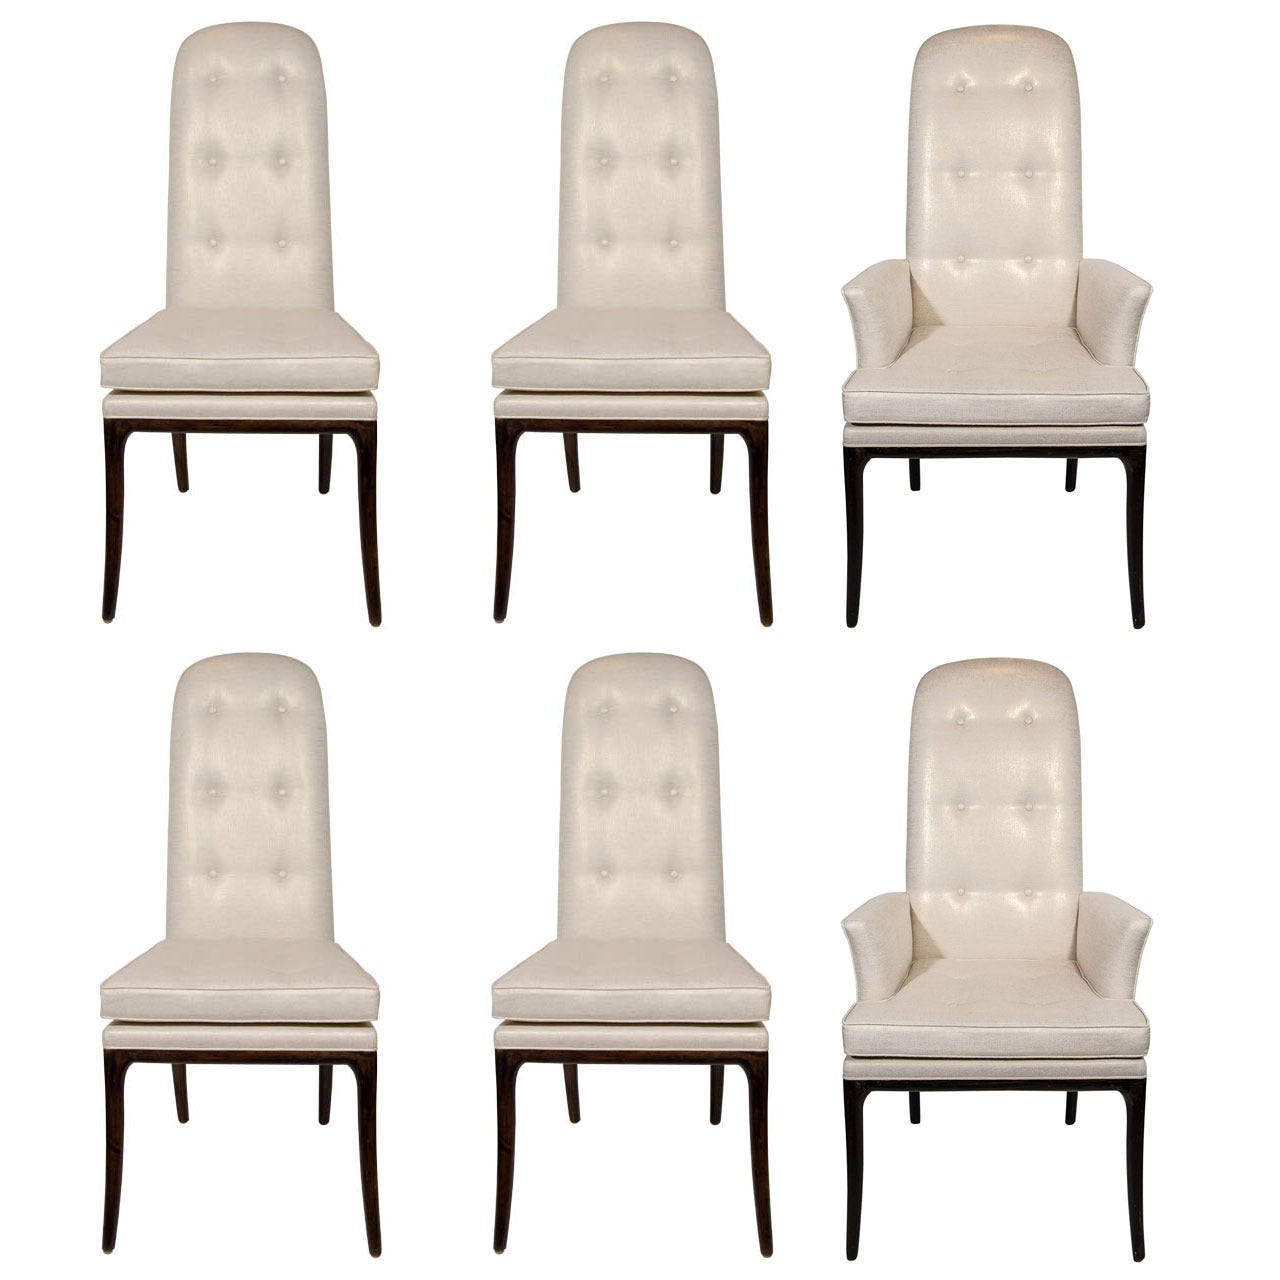 Set of Six Modernist High Back Dining Chairs Designed by Erwin-Lambeth